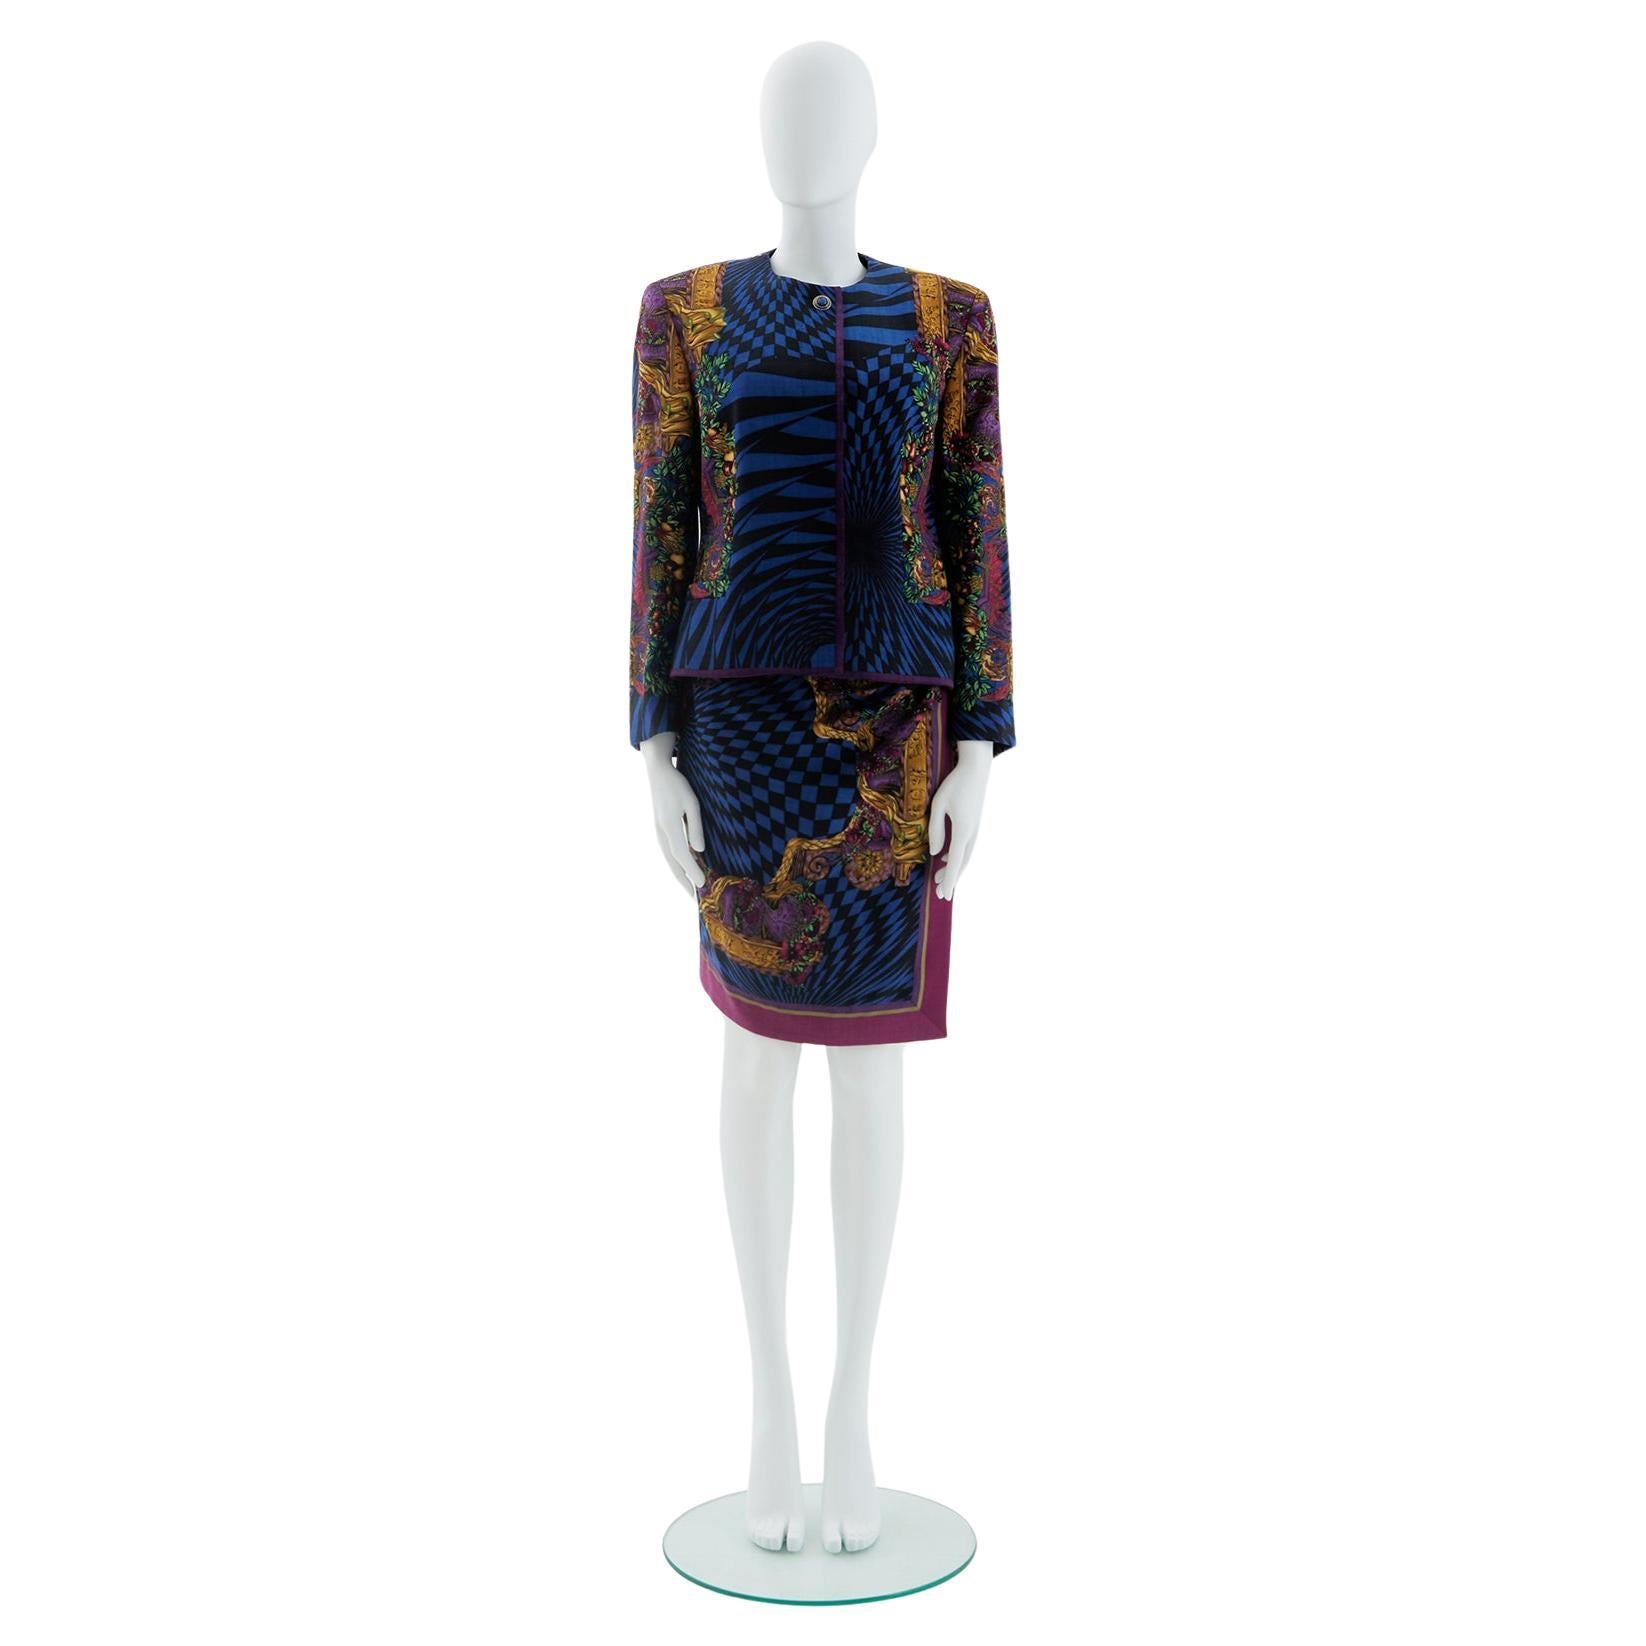 Gianni Versace Couture F/W 1991 Op art Atelier Print jacket and pencil skirt set